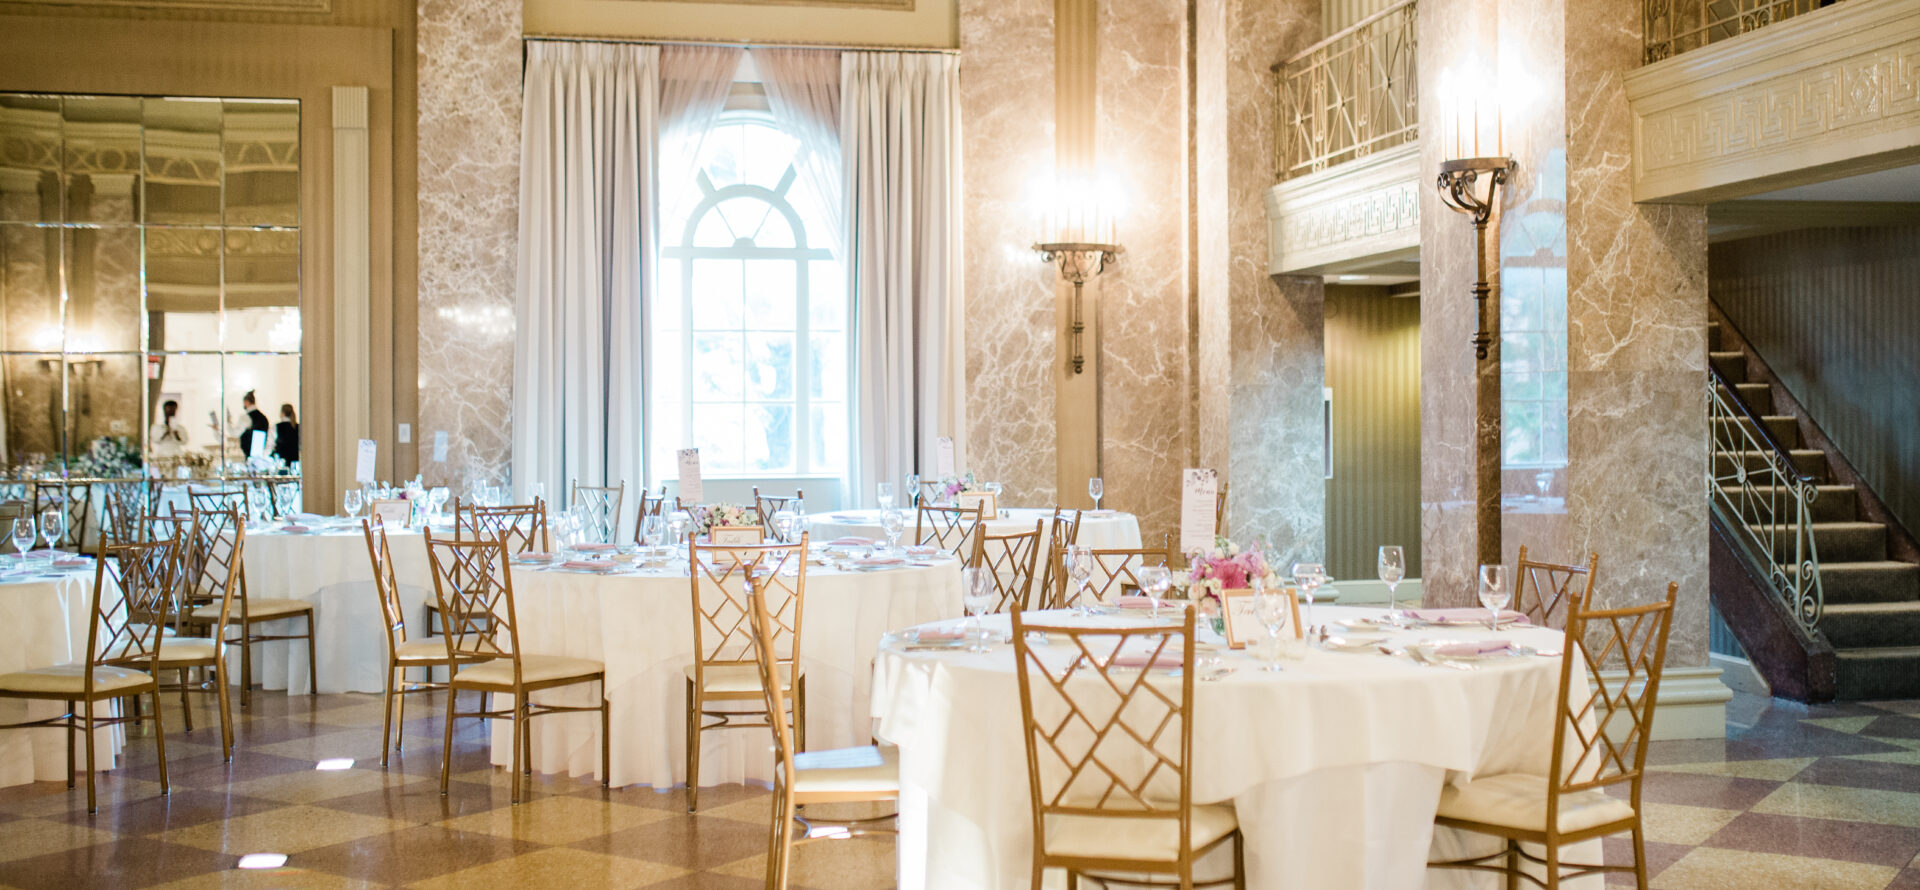 Set tables within a golden, marble walled ballroom